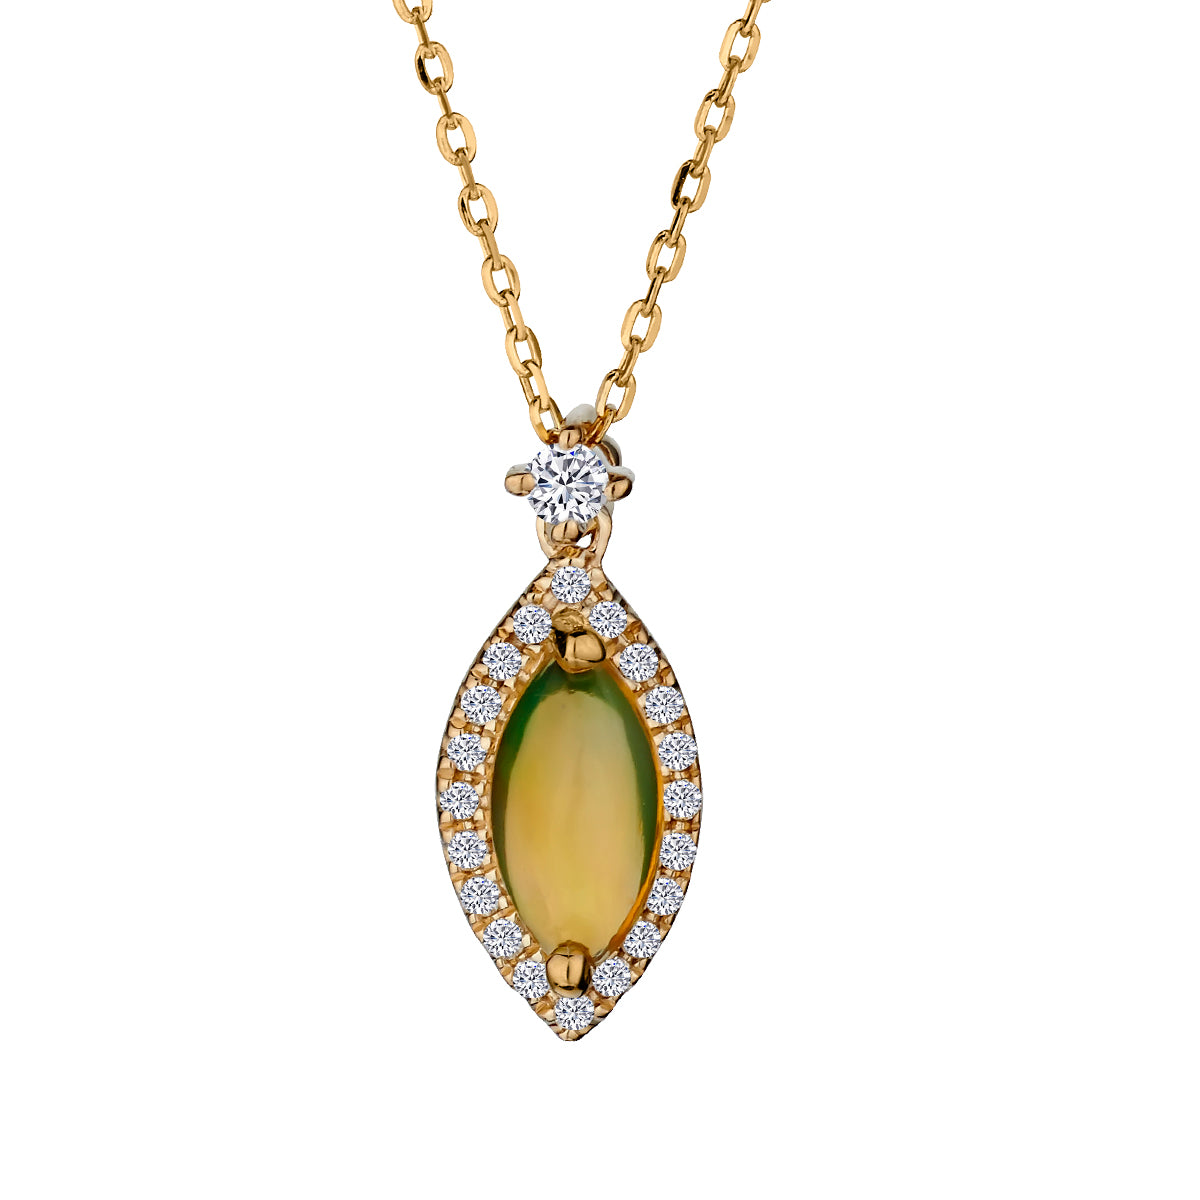 .38 Carat Ethiopian Opal and .10 Carat Diamond Pendant,  10kt Yellow Gold. Necklaces and Pendants. Griffin Jewellery Designs. 